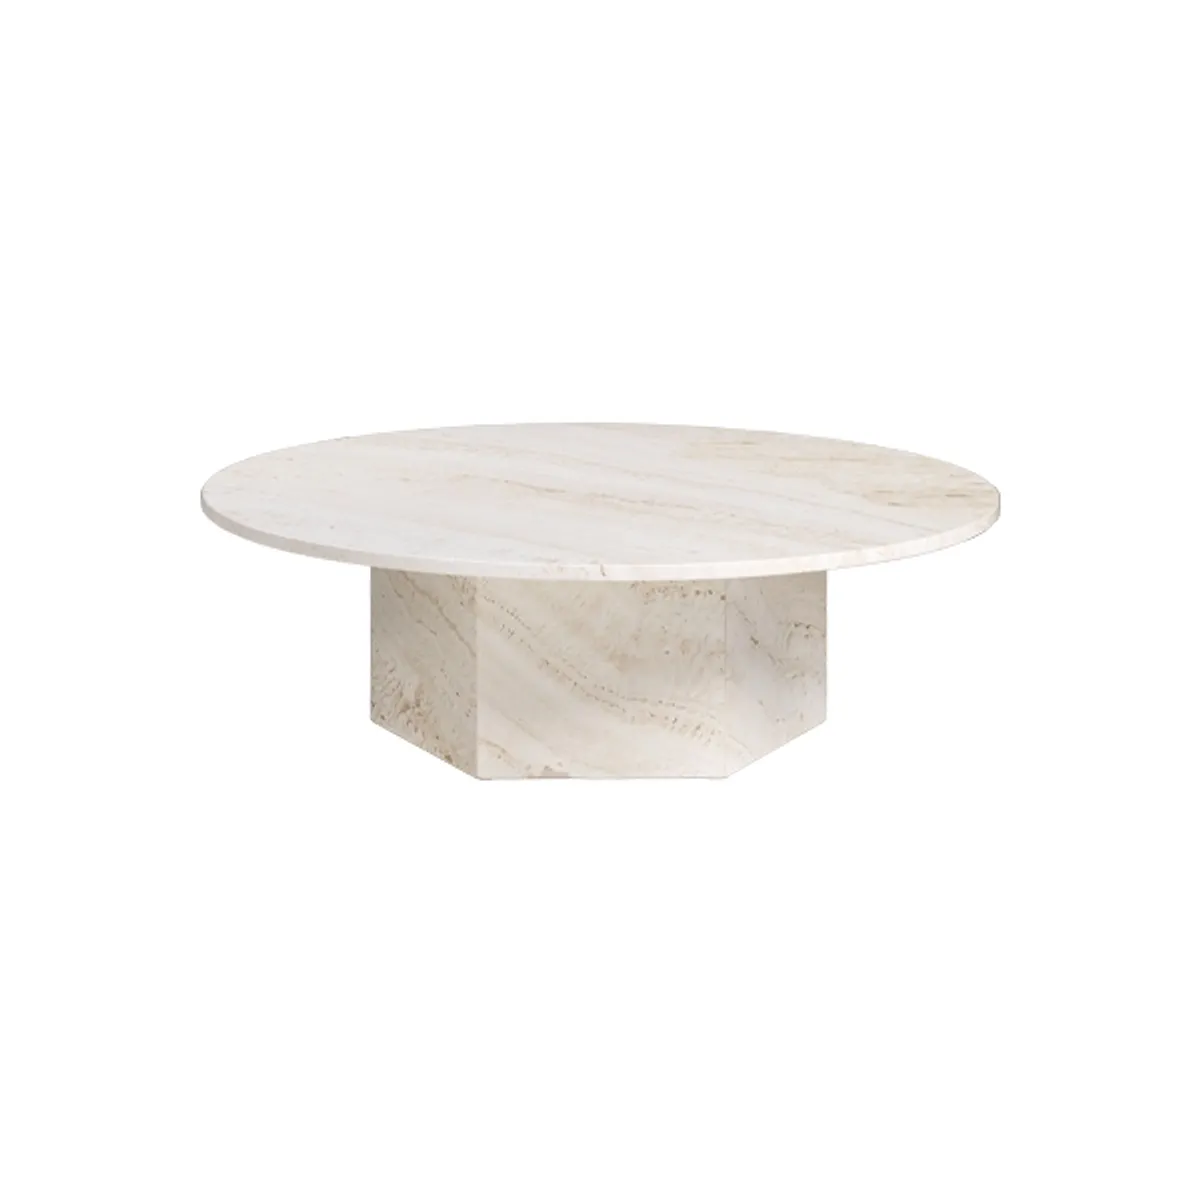 Epic stone coffee table Inside Out Contracts5